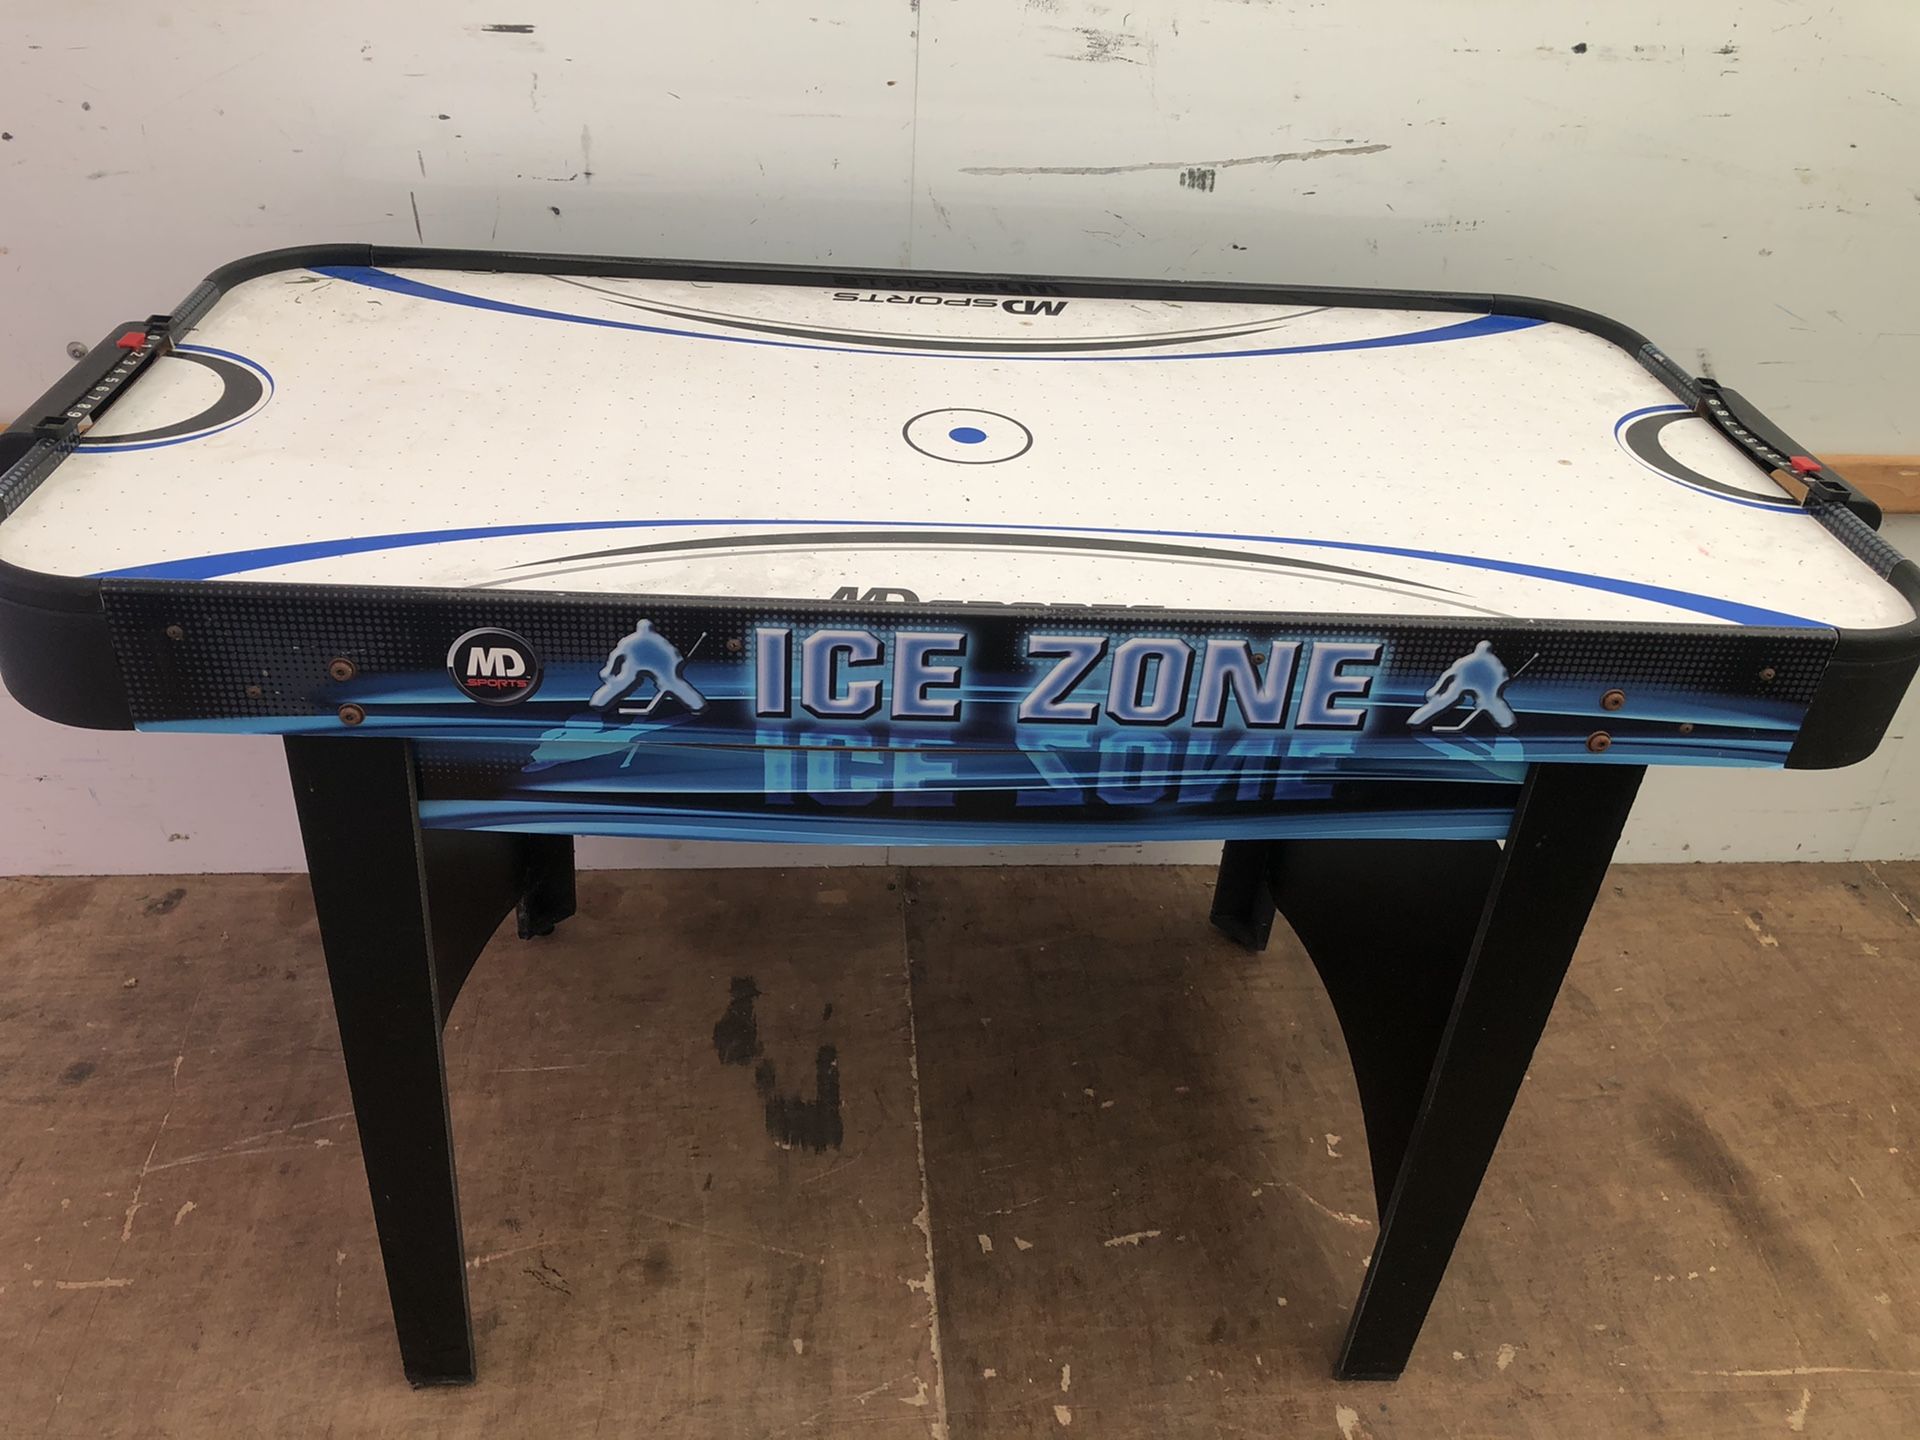 MD Sports 48" Ice Zone Air Powered Hockey table